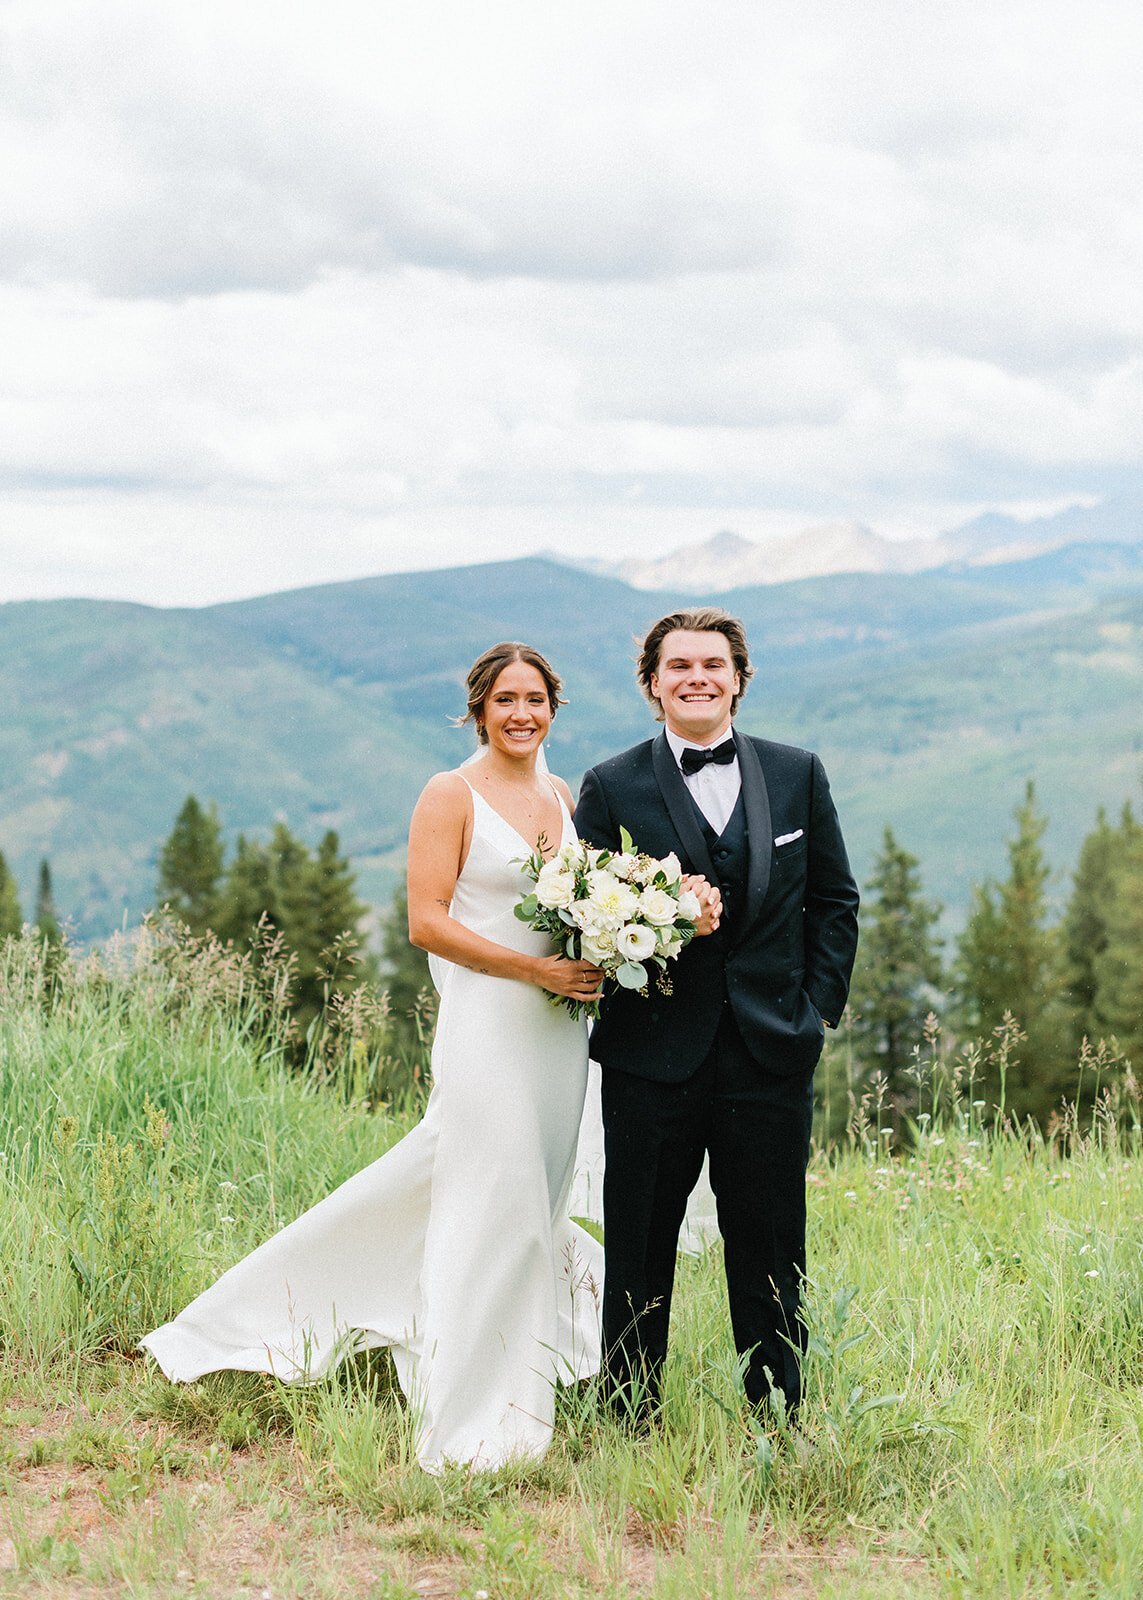 The 10th Vail- Aly & Tanner (20)